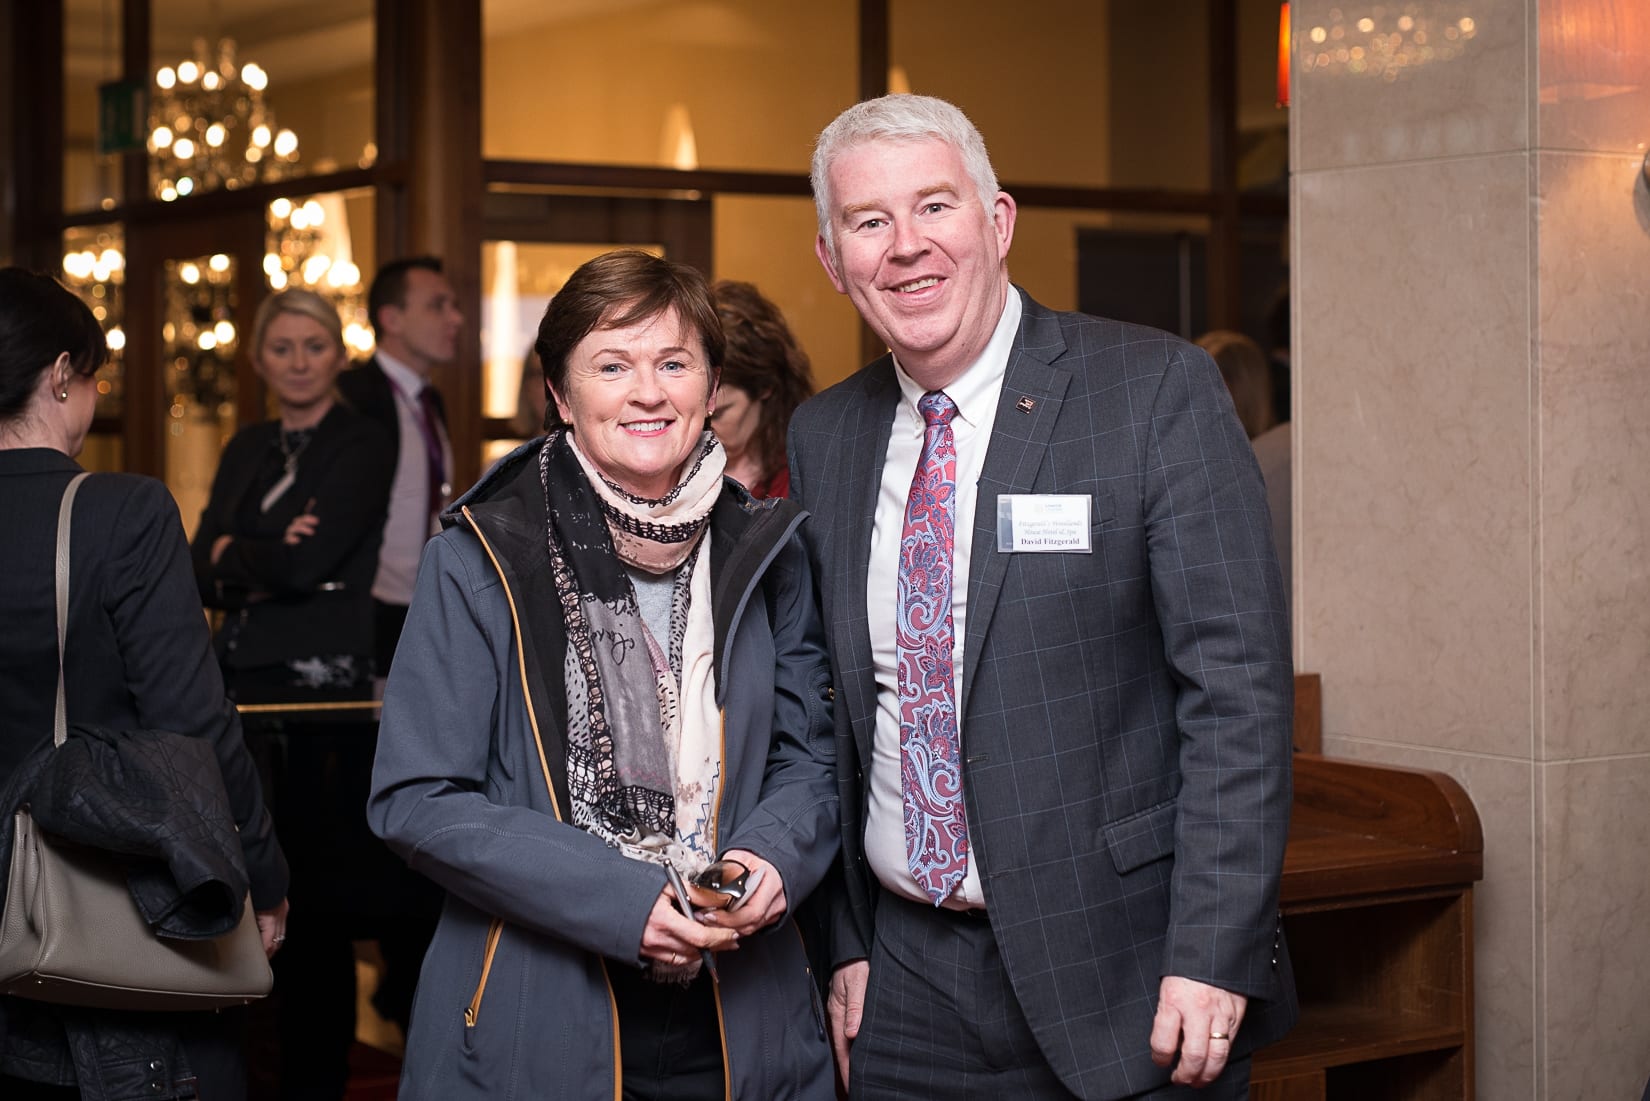 No repro fee- At the Limerick Chamber business briefing on ‘Spending Trends: Tourism, Retail &  Hospitality Industry Insights & Marketing Trends’ at the Savoy Hotel  - 22-01-2019, From Left to Right: Brenda Ryan - Centra Raheen, David Fitzgerald - Fitzgerald’s Woodlands House Hotel. 
Photo credit Shauna Kennedy